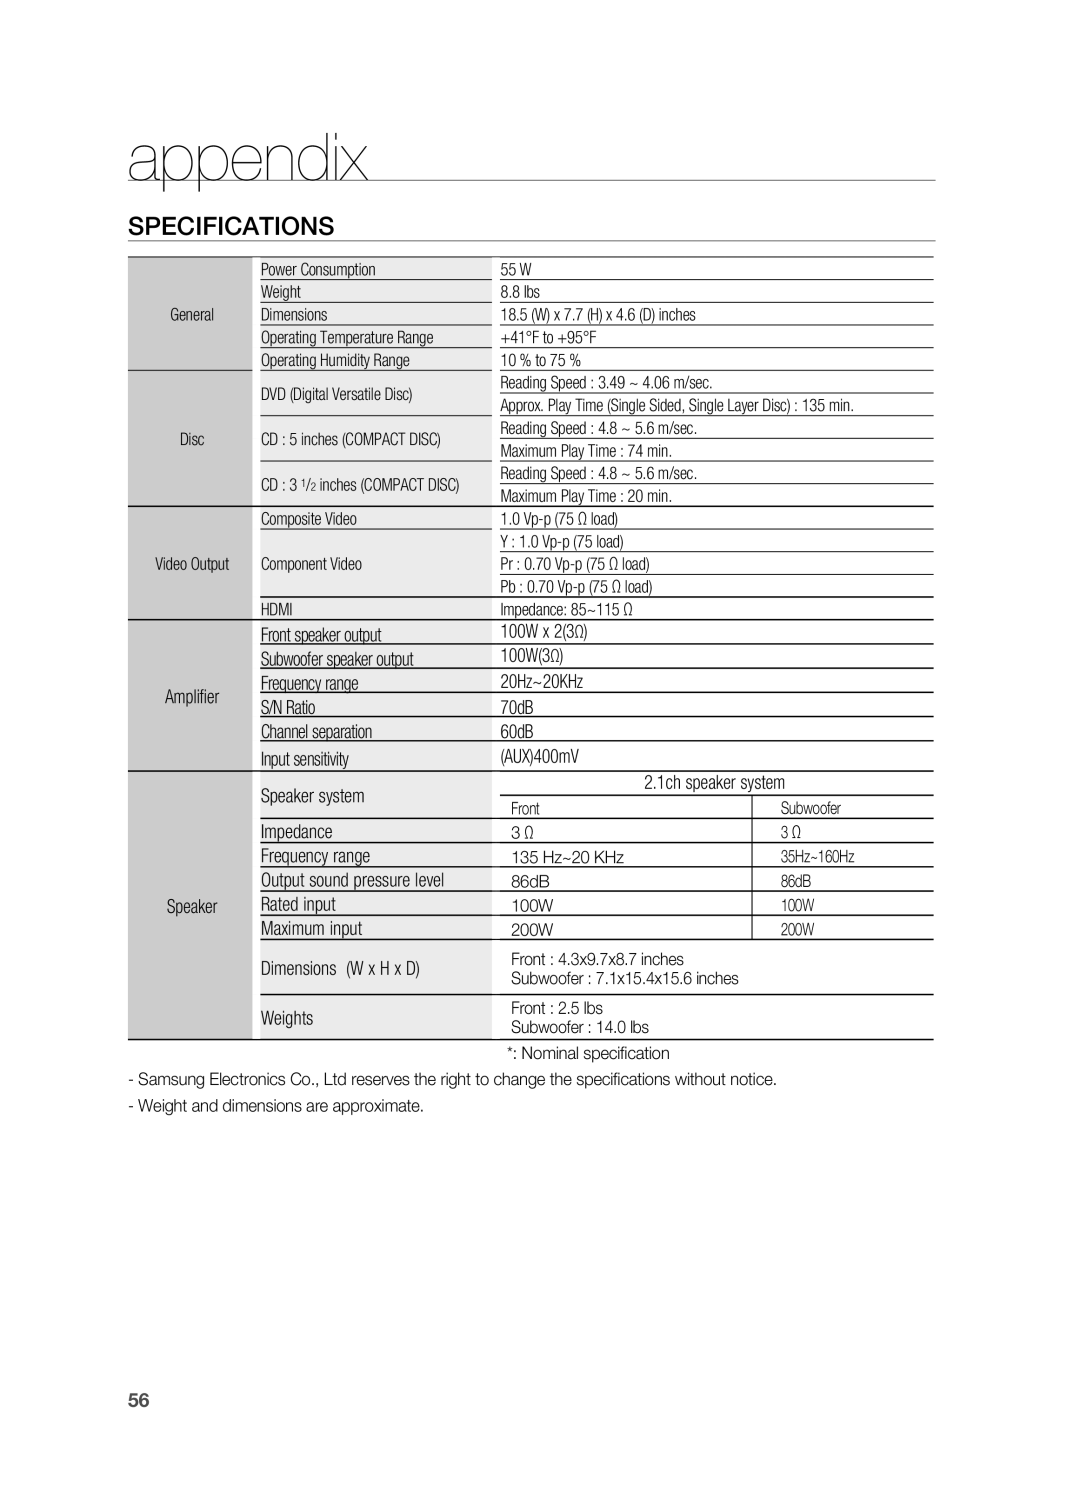 Samsung HT-A100 user manual Specifications, appendix 